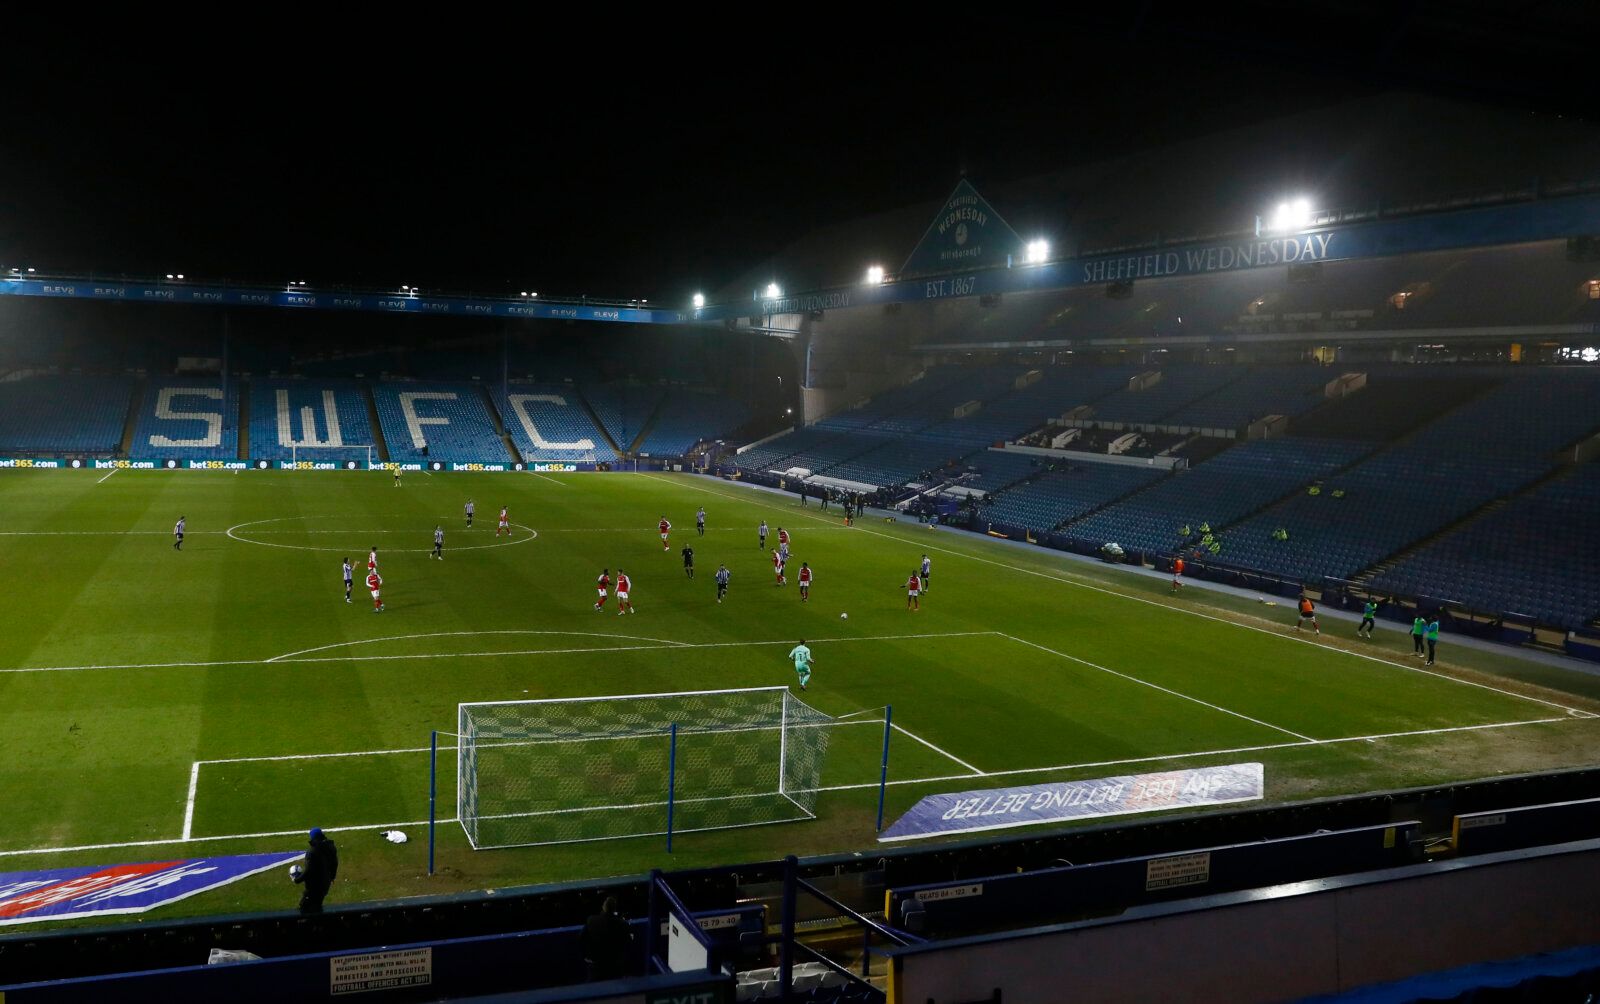 Soccer Football - Championship - Sheffield Wednesday v Rotherham United - Hillsborough, Sheffield, Britain - March 3, 2021  General view during the match Action Images/Jason Cairnduff EDITORIAL USE ONLY. No use with unauthorized audio, video, data, fixture lists, club/league logos or 'live' services. Online in-match use limited to 75 images, no video emulation. No use in betting, games or single club /league/player publications.  Please contact your account representative for further details.